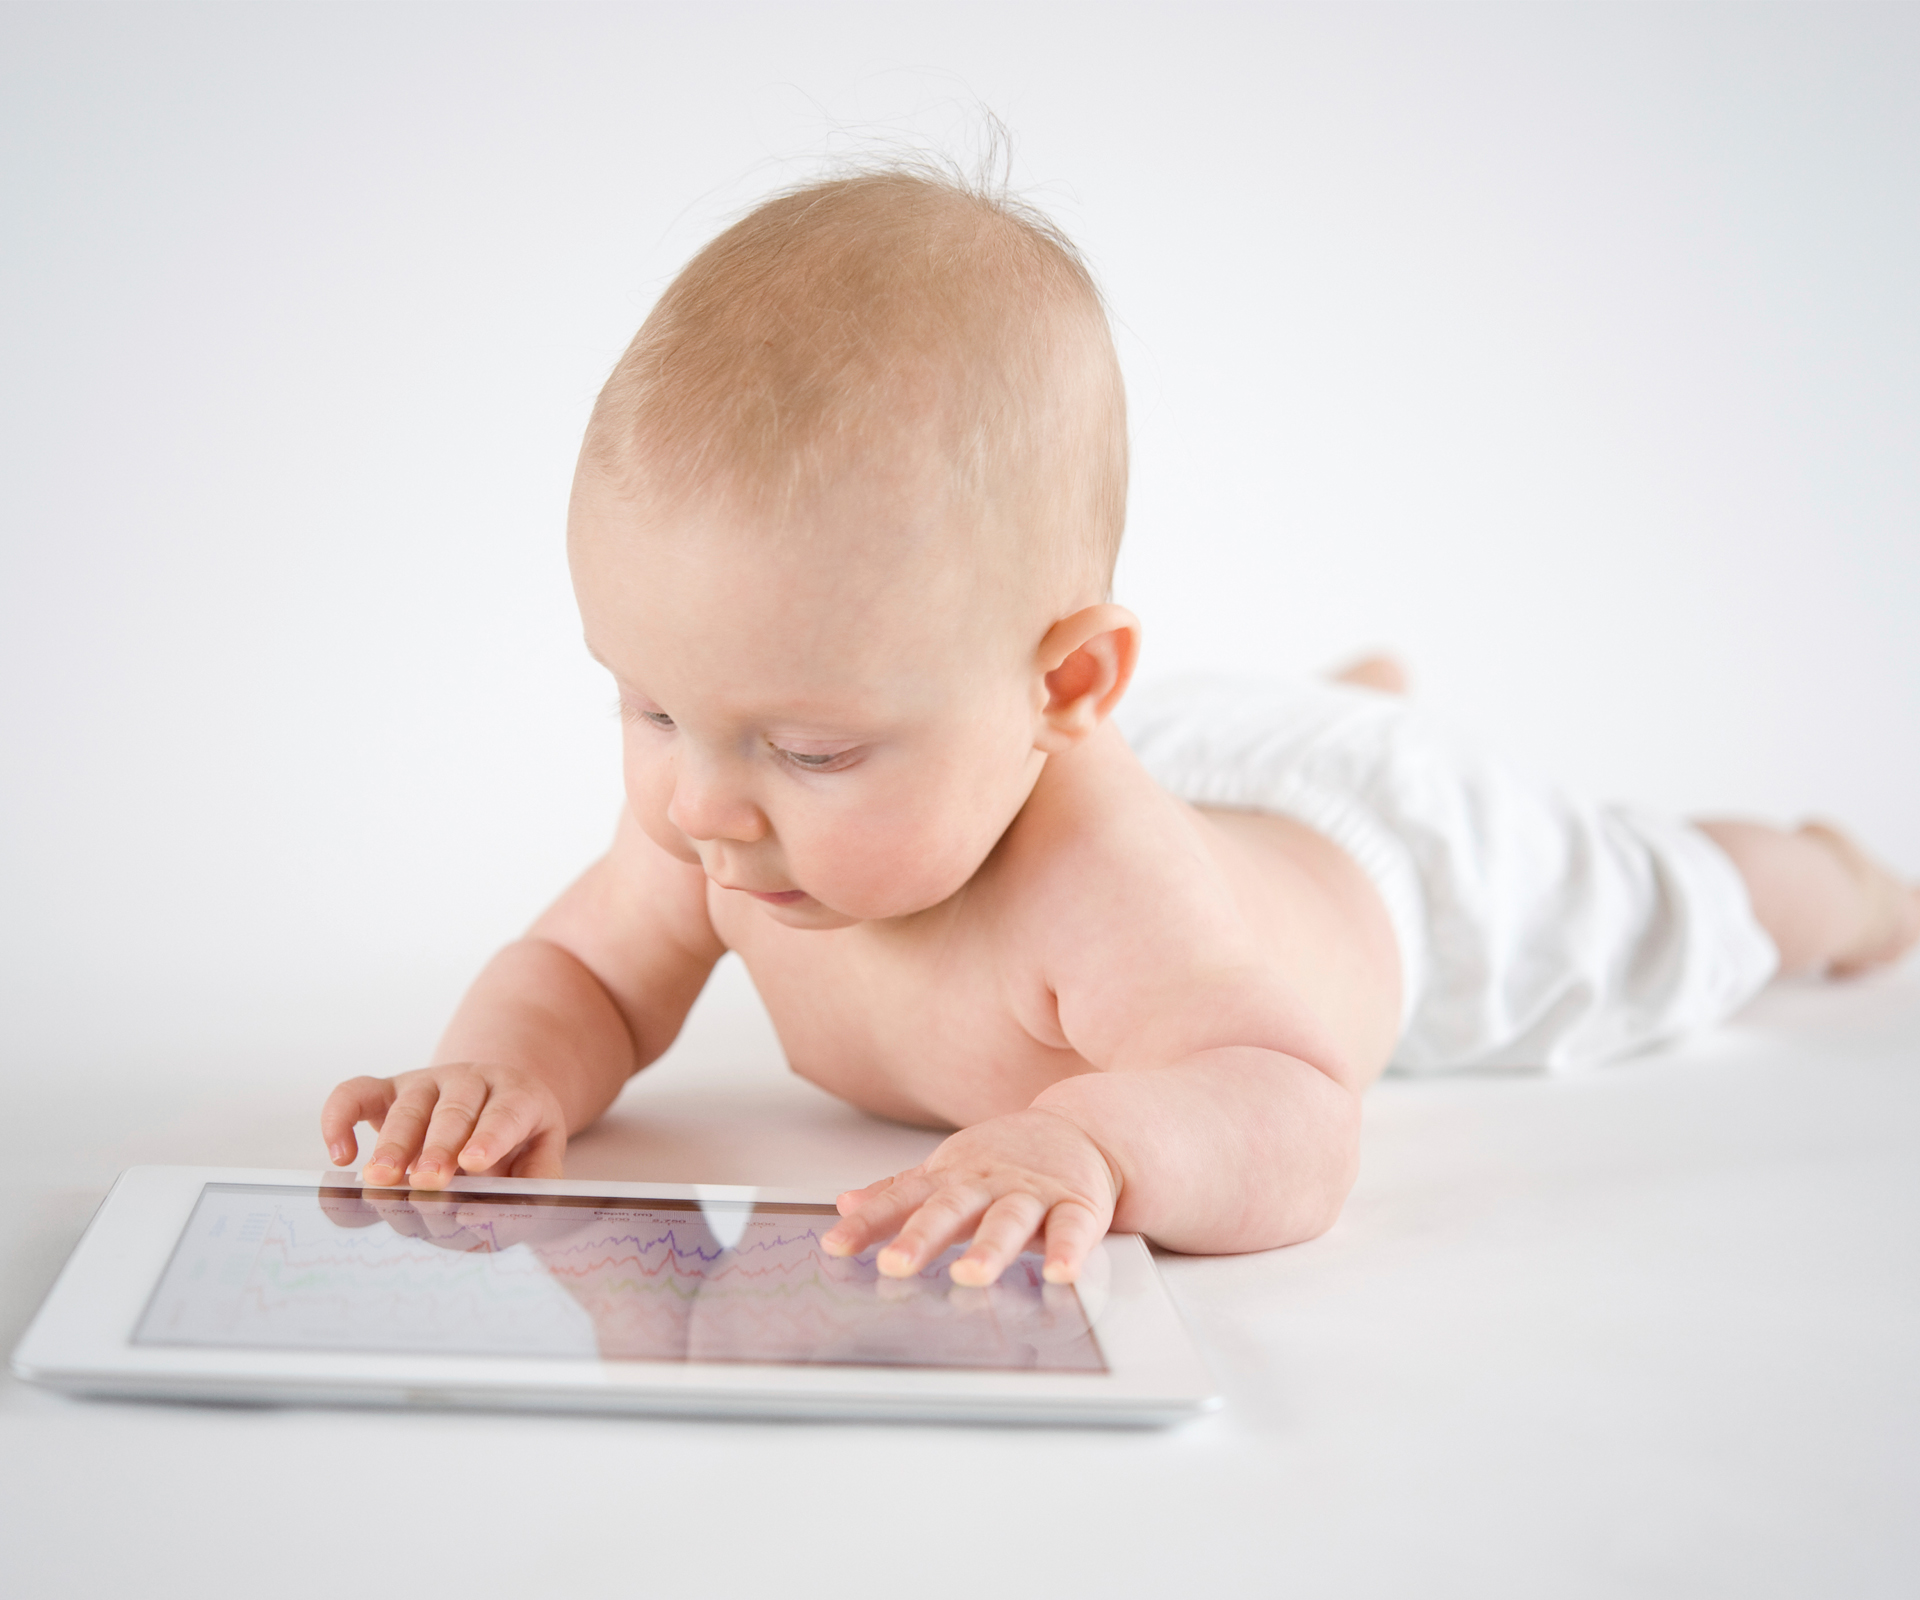 Give babies iPads at birth, scientists say